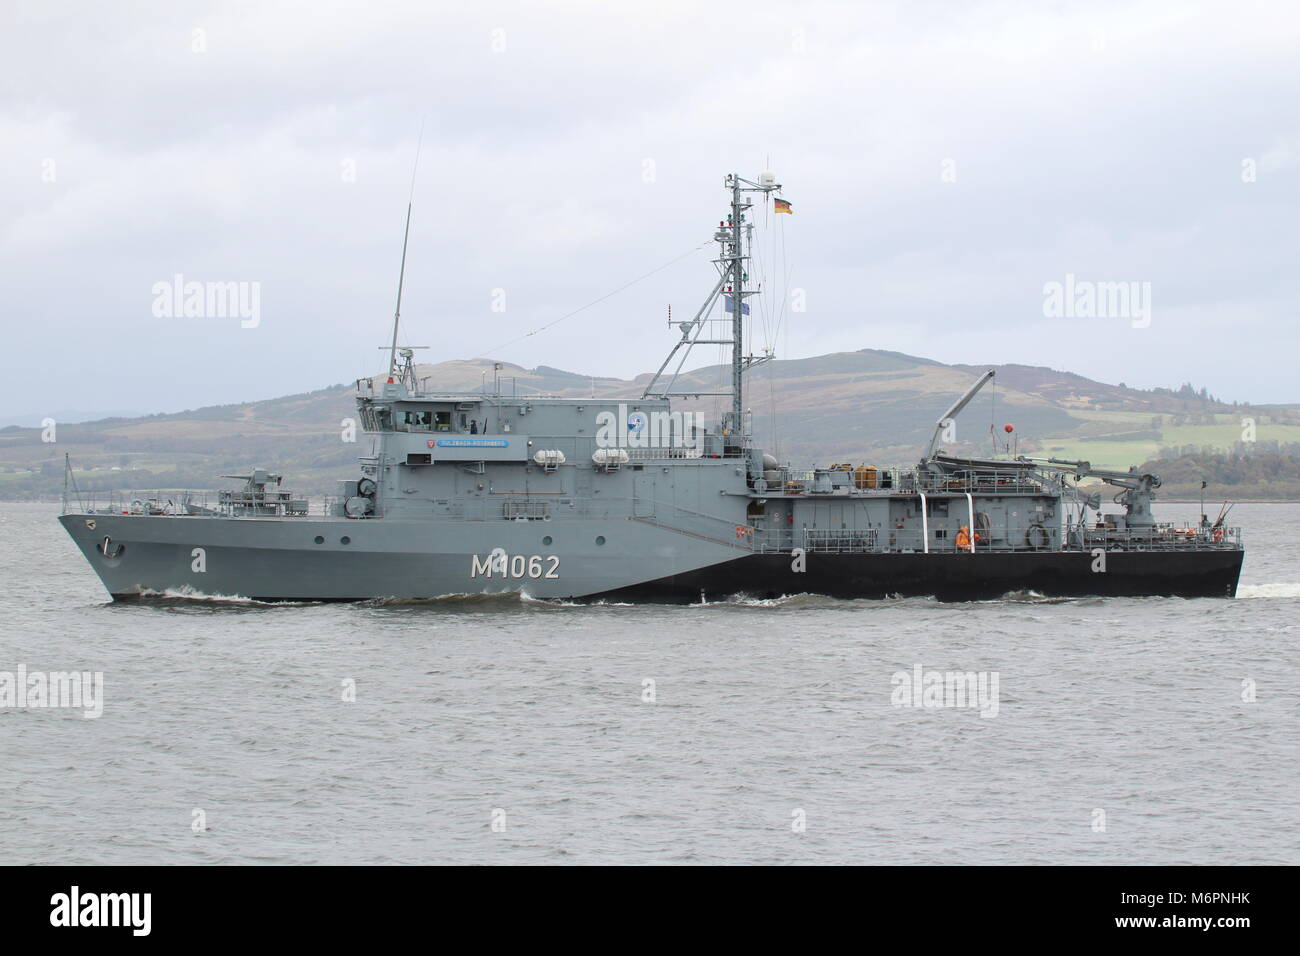 FGS Sulzbach-Rosenberg (M1062), a Frankenthal-class minehunter from the German Navy, passing Greenock at the start of Exercise Joint Warrior 17-2. Stock Photo